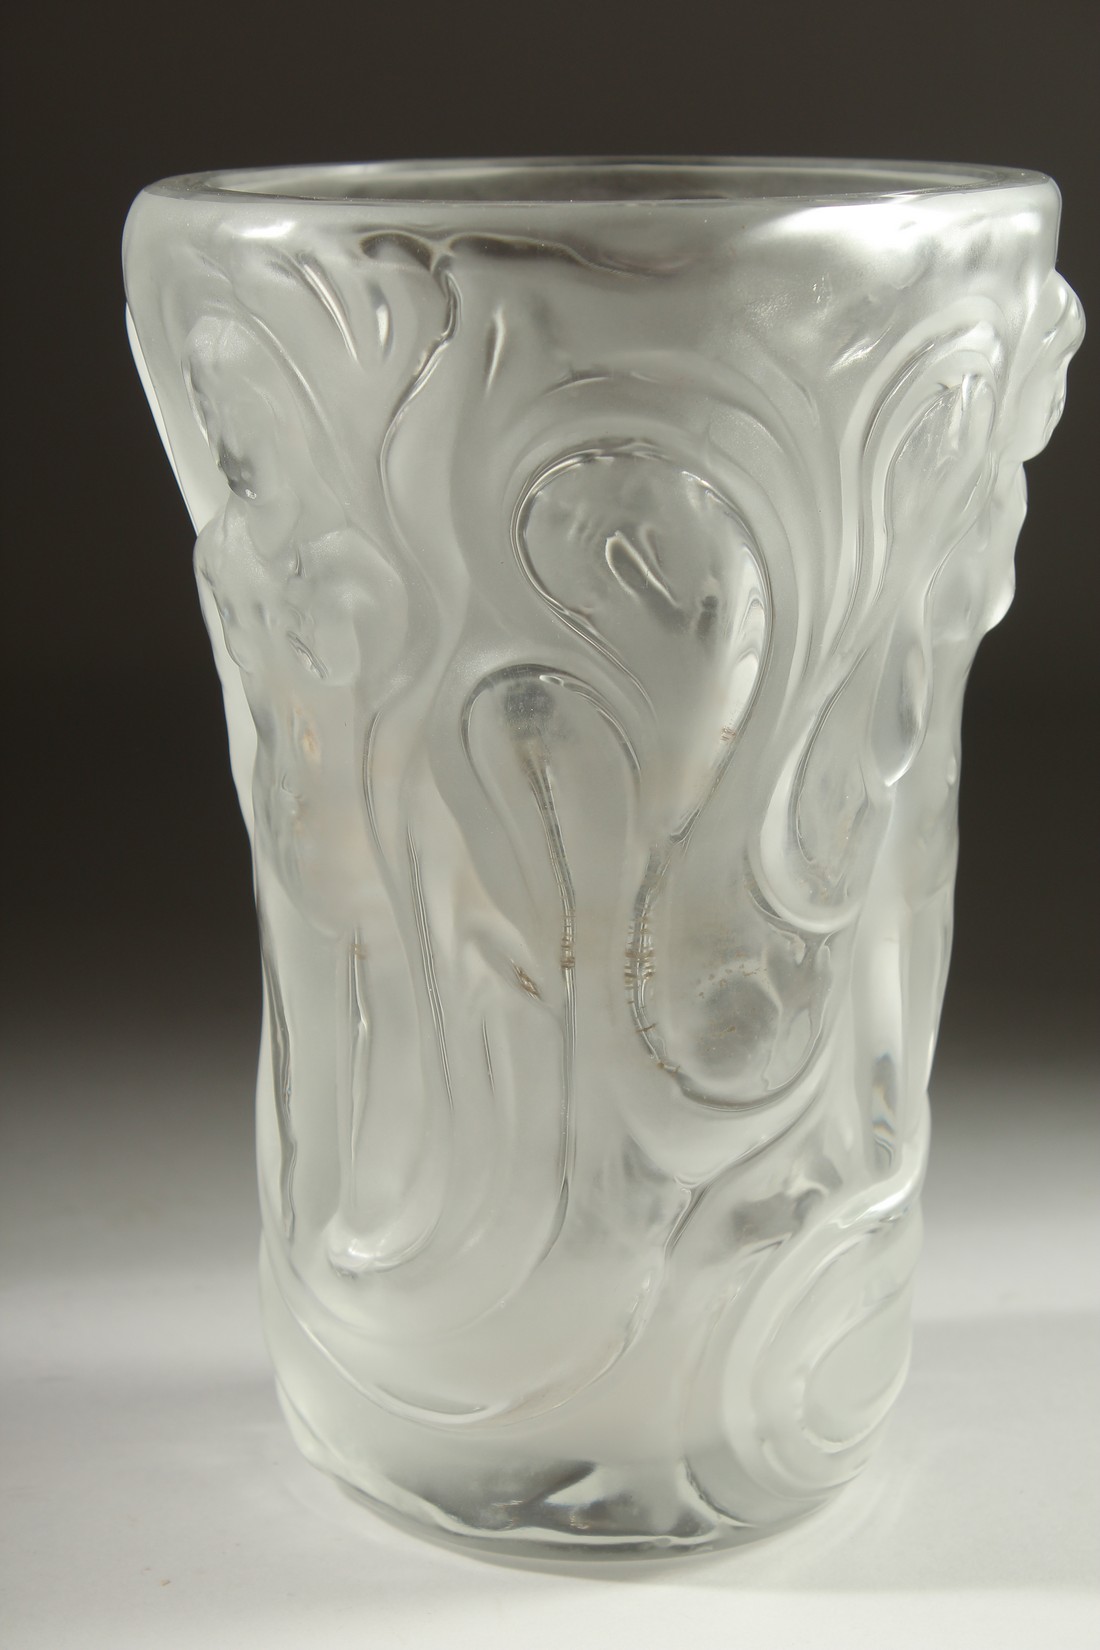 A GOOD LALIQUE FROSTED GLASS VASE the sides with nudes. Engraved: Lalique,France. 8.5ins high. - Image 2 of 6